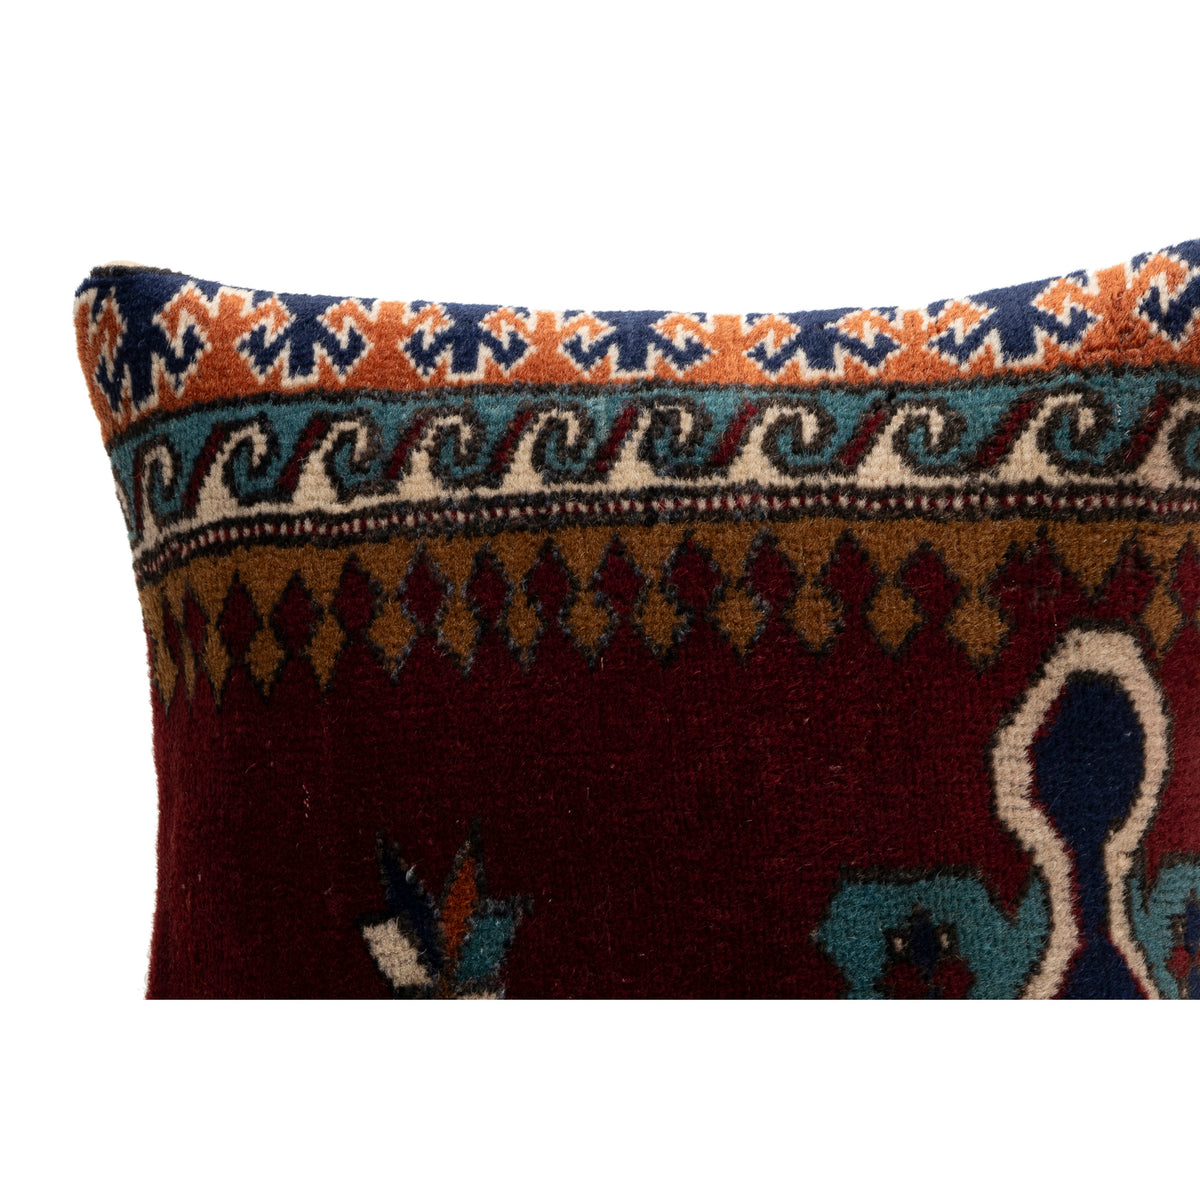 Handwoven Oriental Rug Pillow Cover 16" x 16"